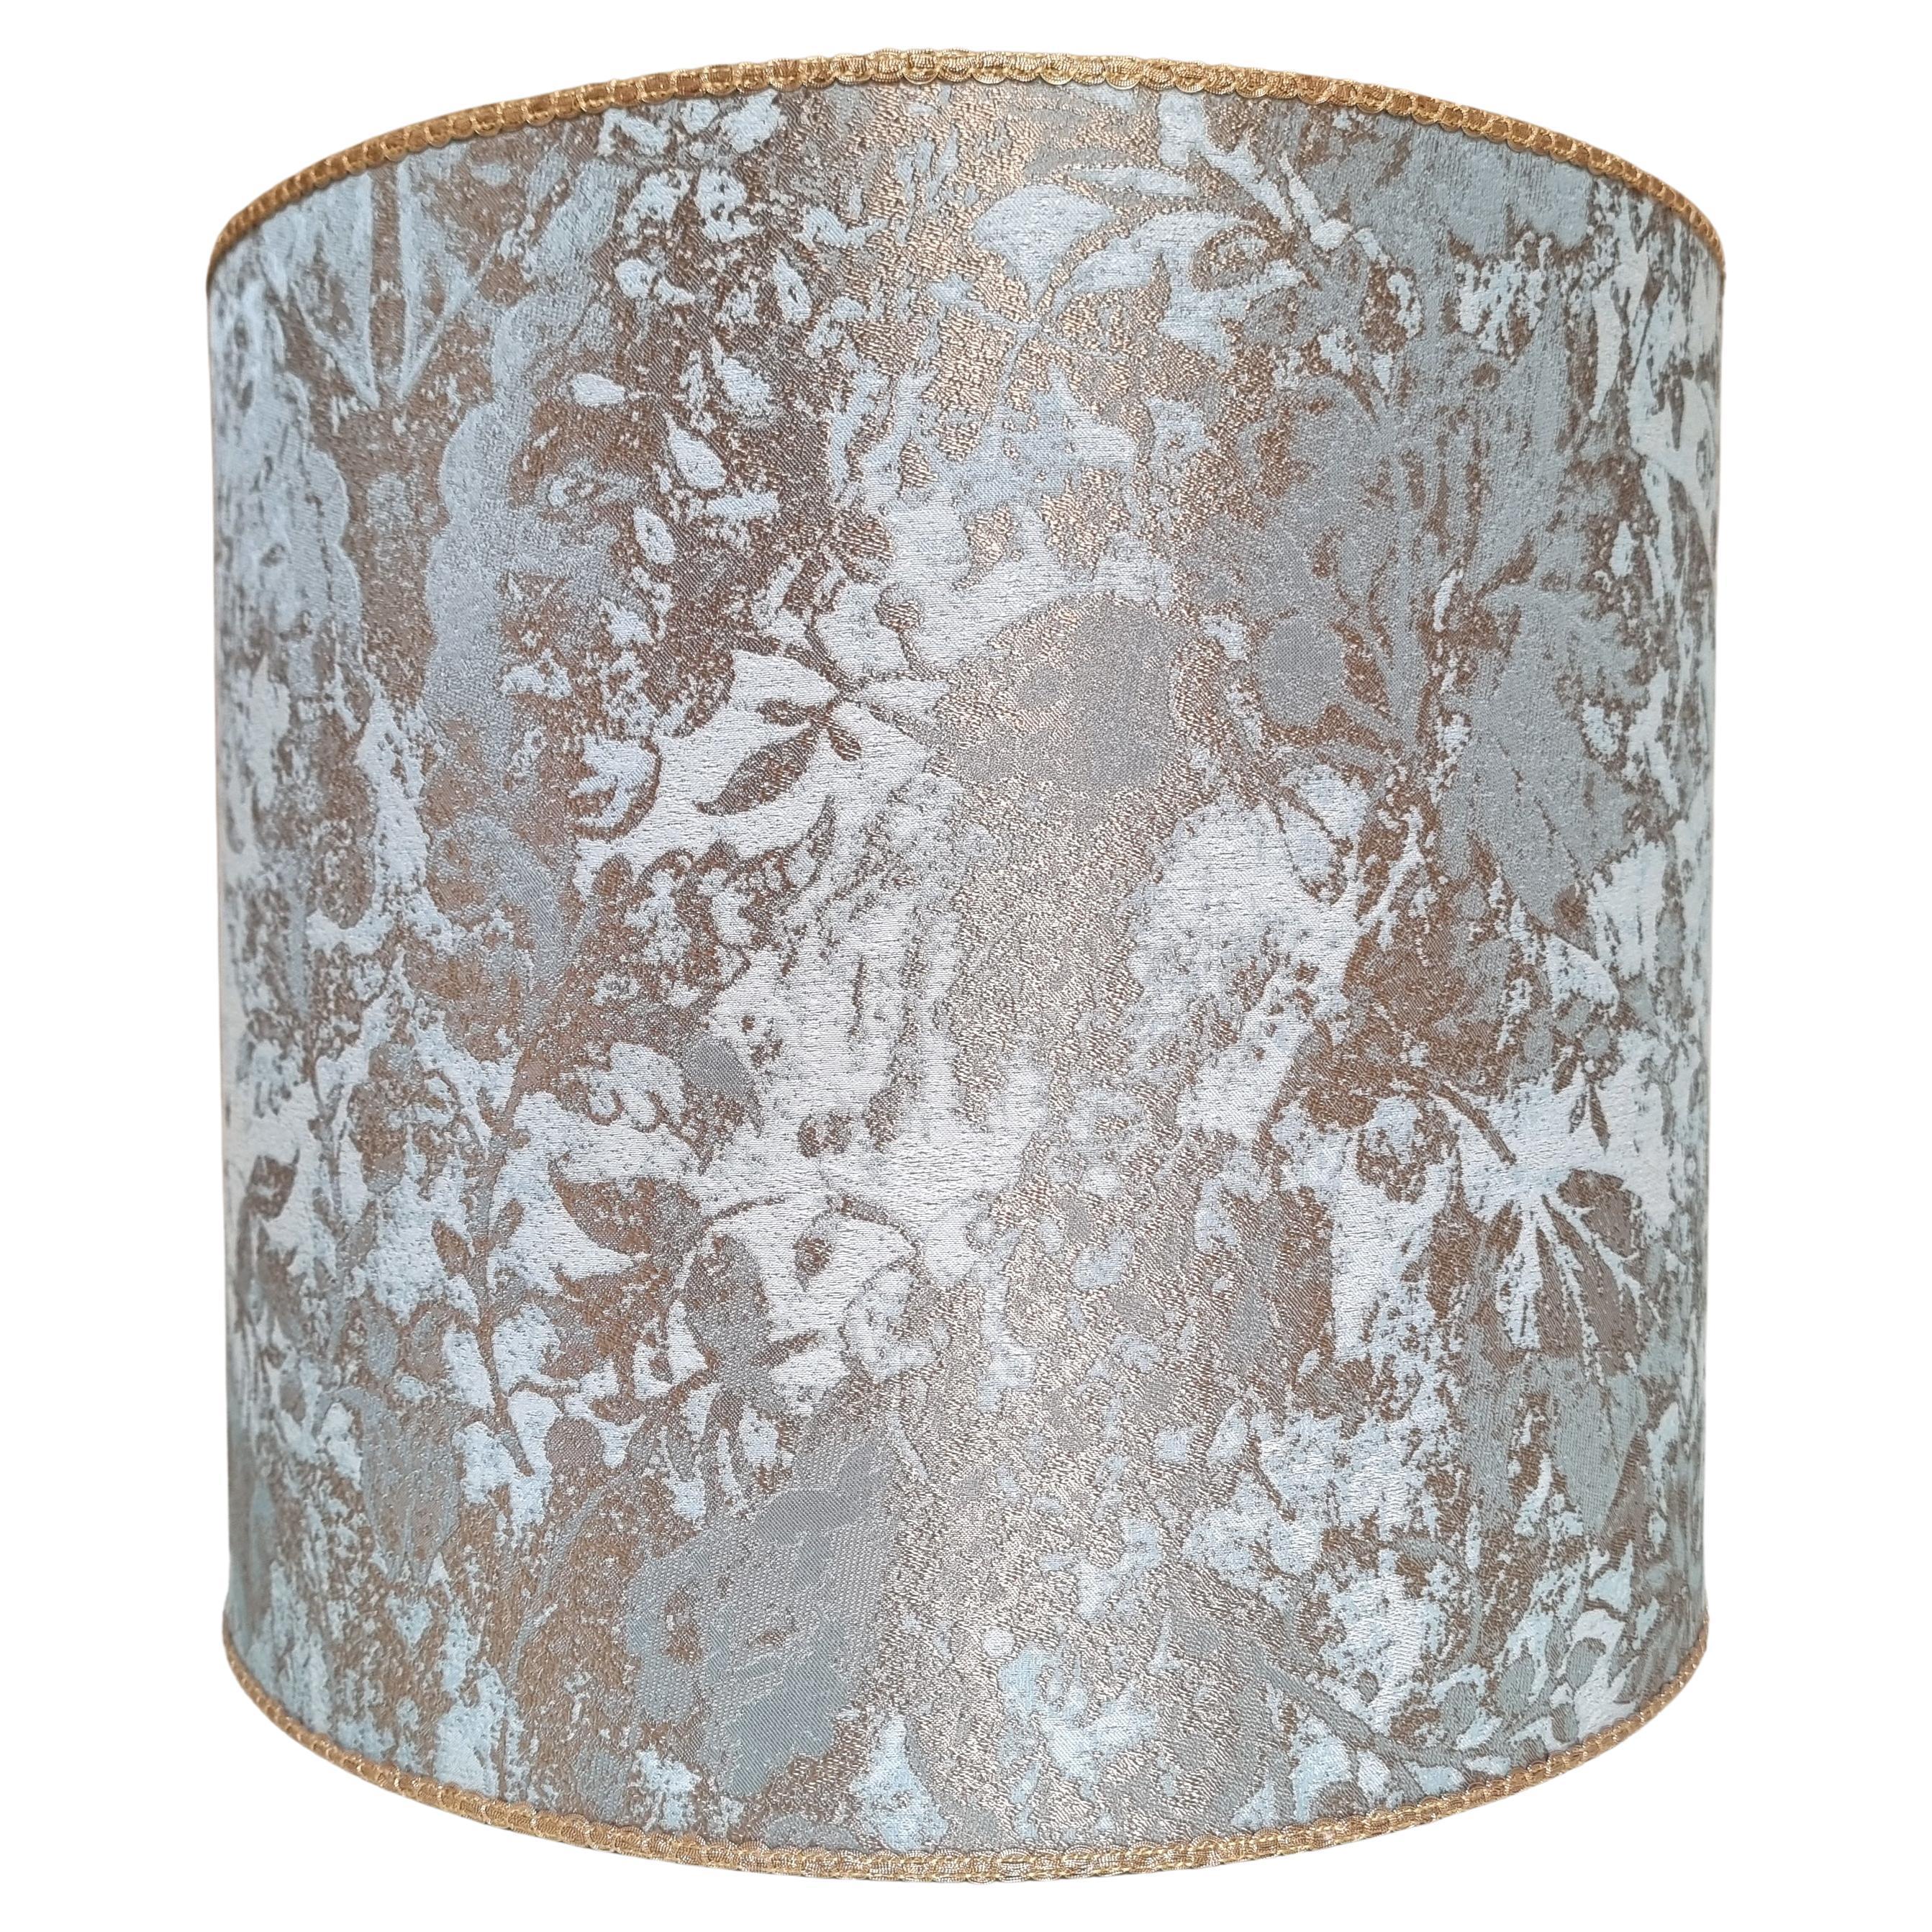 This drum lampshade is handmade using Rubelli jacquard fabric - Mirage pattern - in aqua blue color, finished with gold trim. Suitable for any table lamp.

The Mirage viscose and cotton jacquard is a typical example of the processing of historical